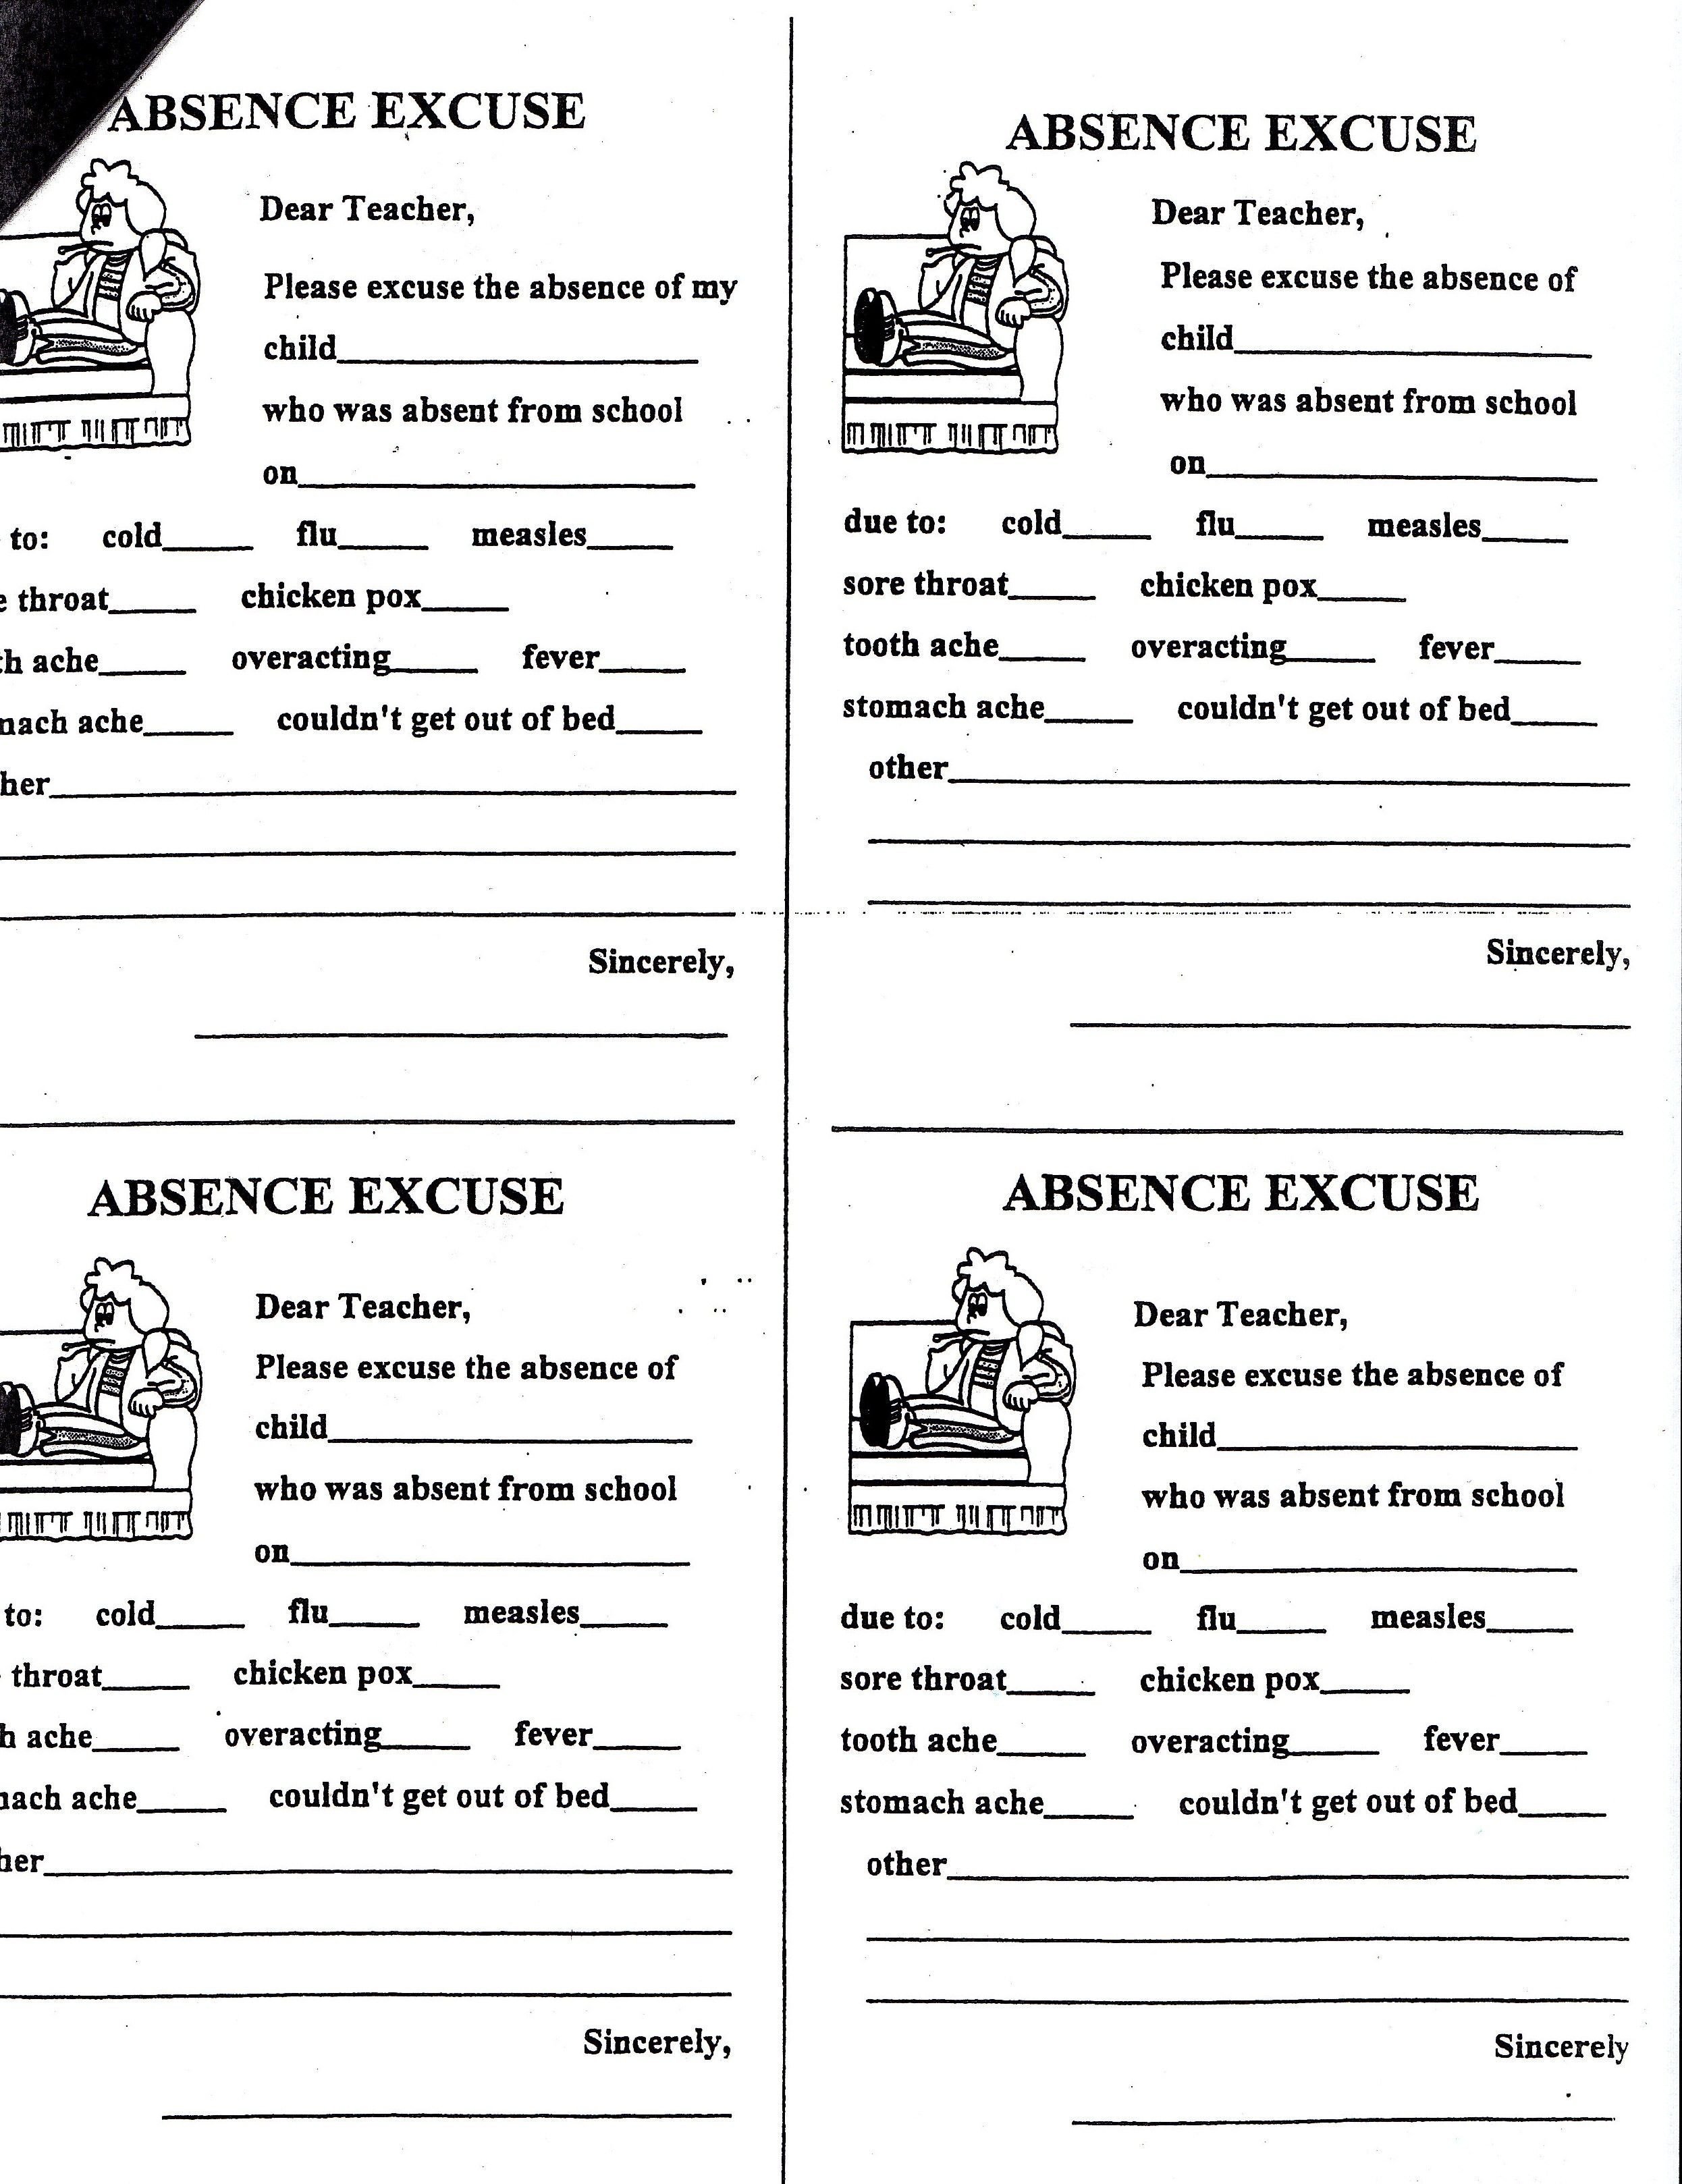 School Excuse Note Template School Absence Excuse Letter Sample Homelightingcowarning